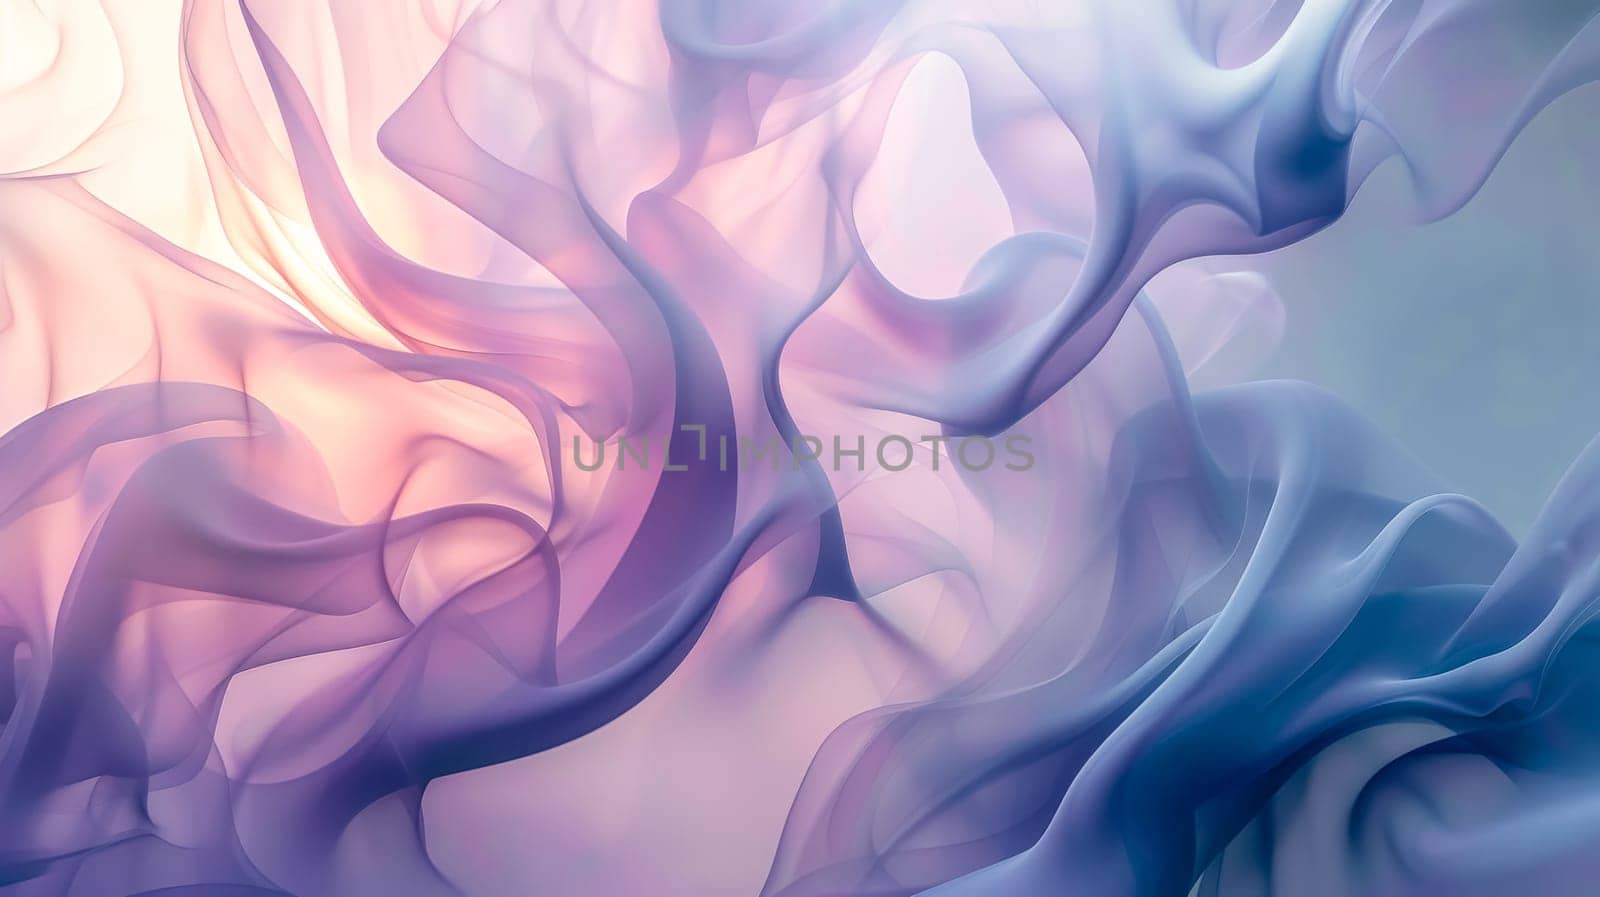 Smooth waves of silk in pastel colors creating a serene and dreamy backdrop